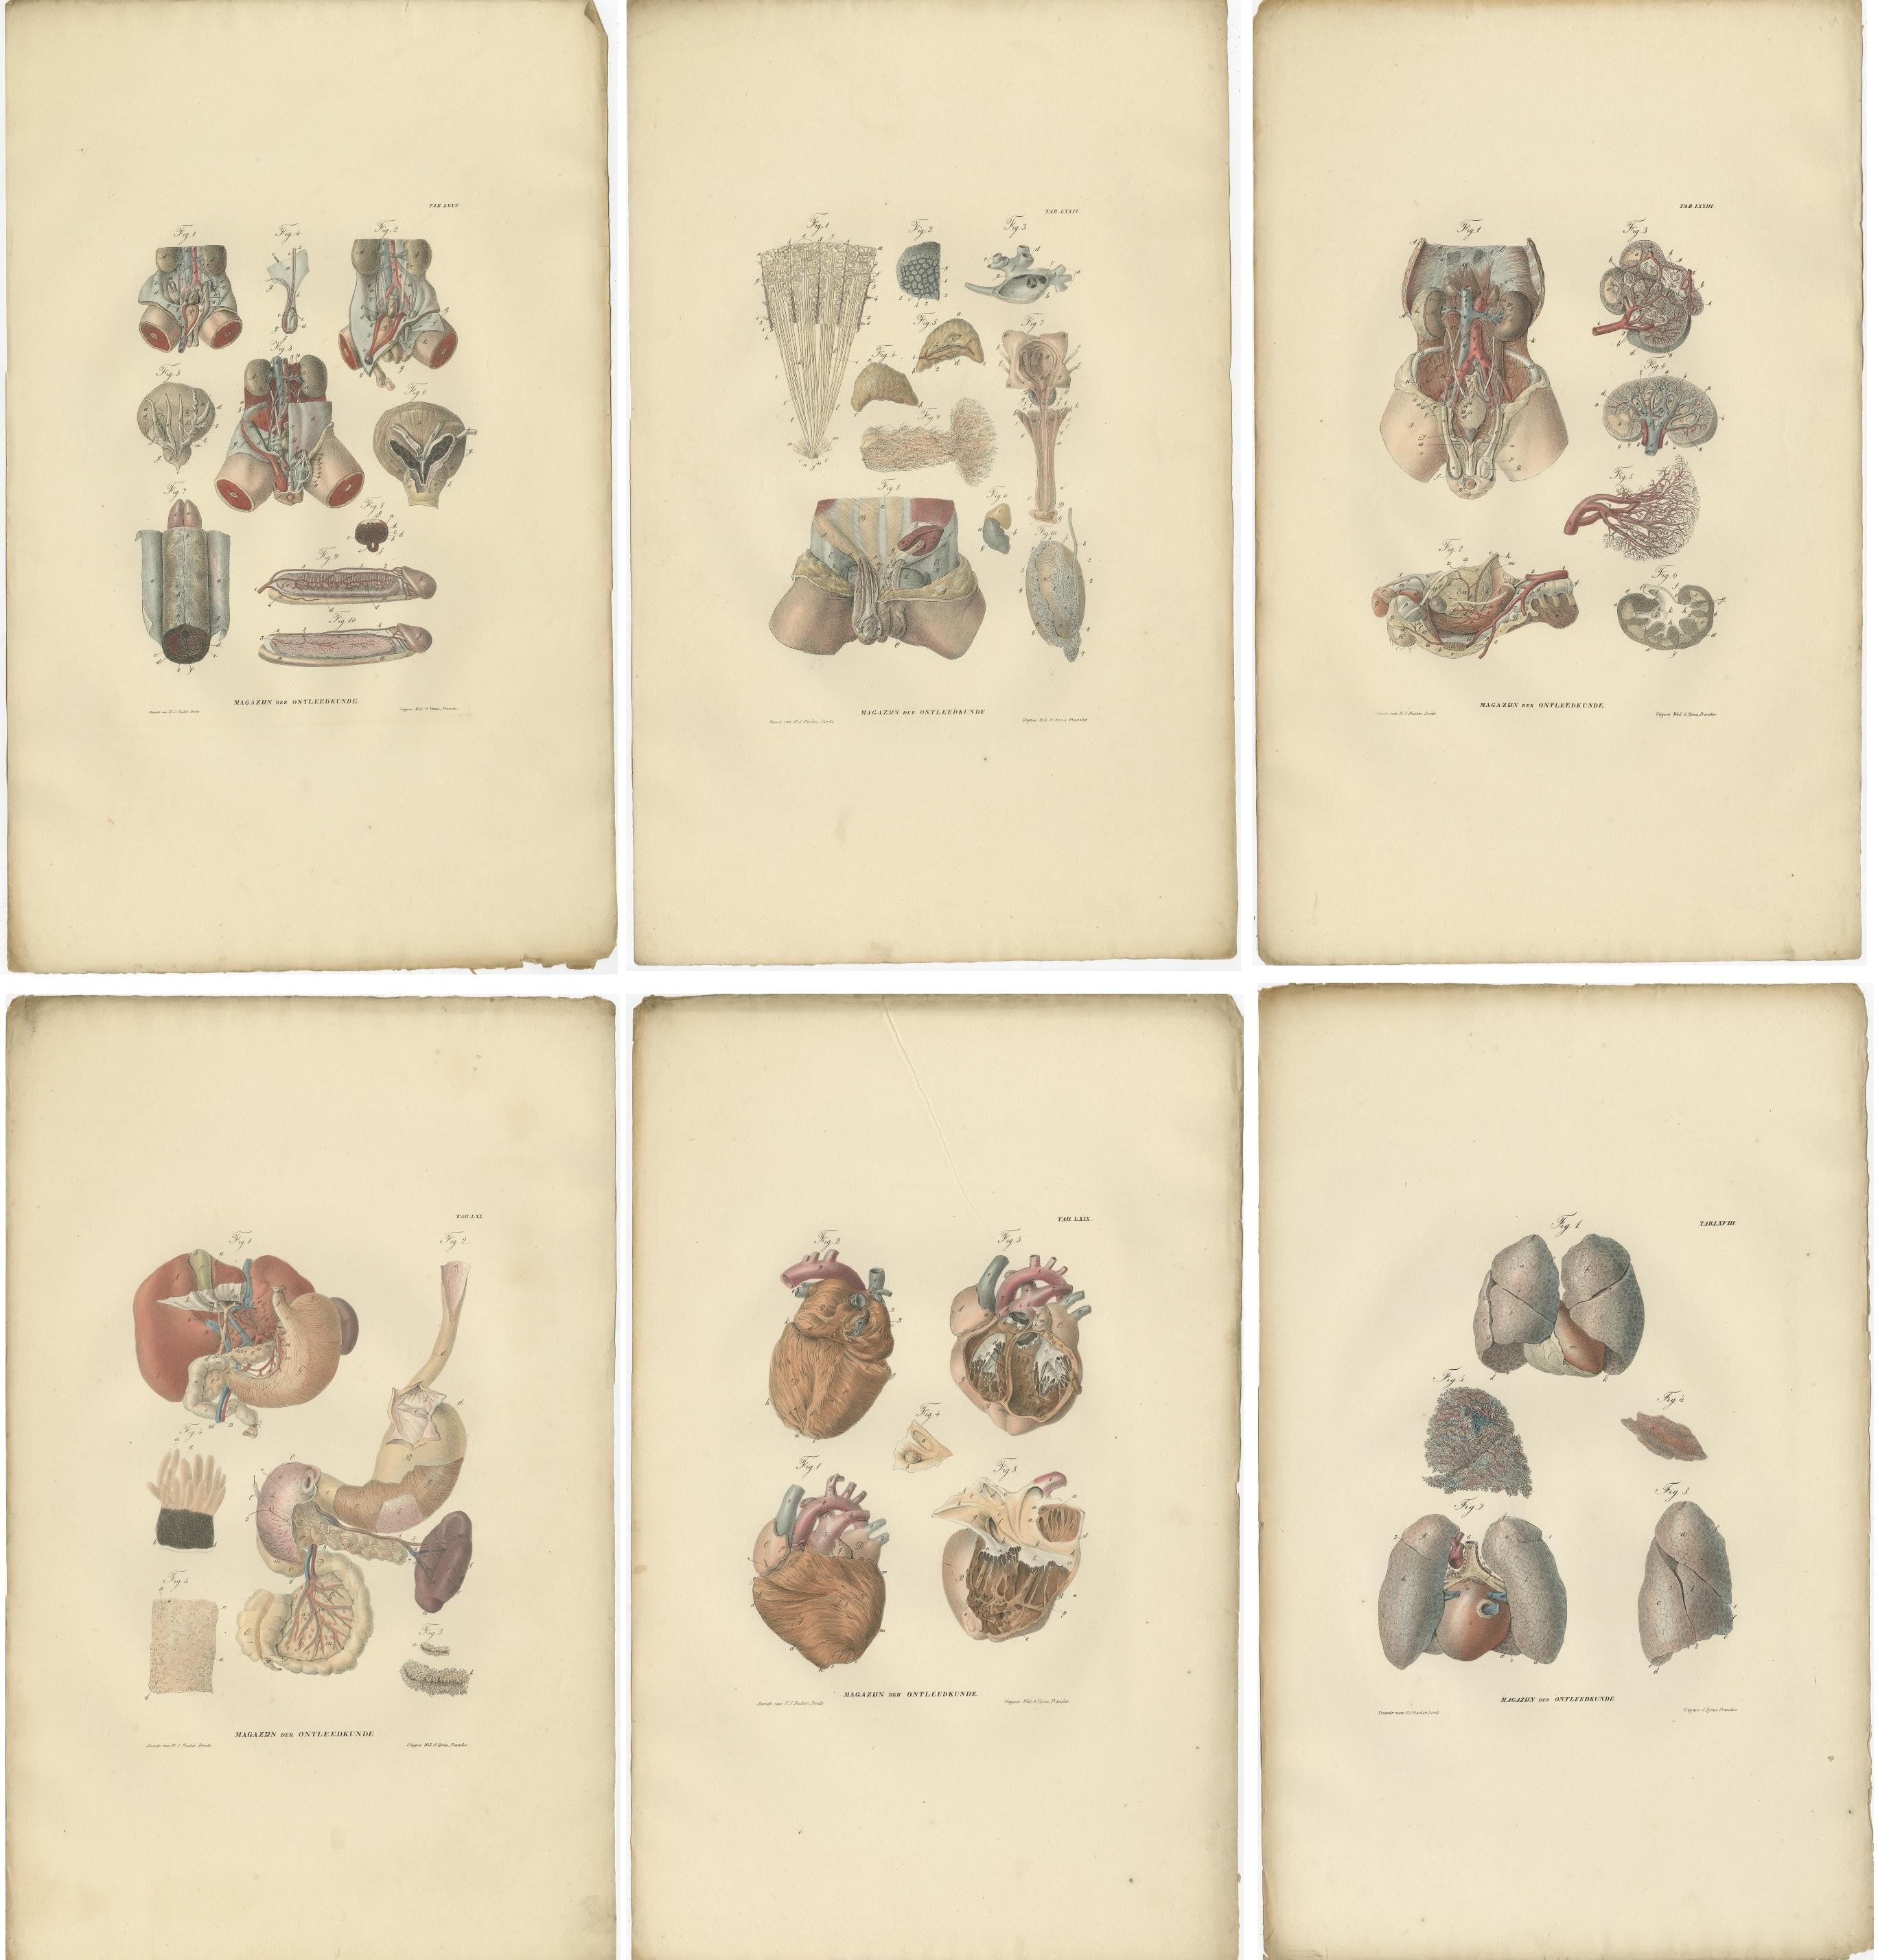 Set of 27 antique anatomy prints of splanchnology, the study of the visceral organs, i.e. digestive, urinary, reproductive and respiratory systems. These prints originate from 'Magazijn van ontleedkunde' by Dr. Th. Richter. Published 1839.